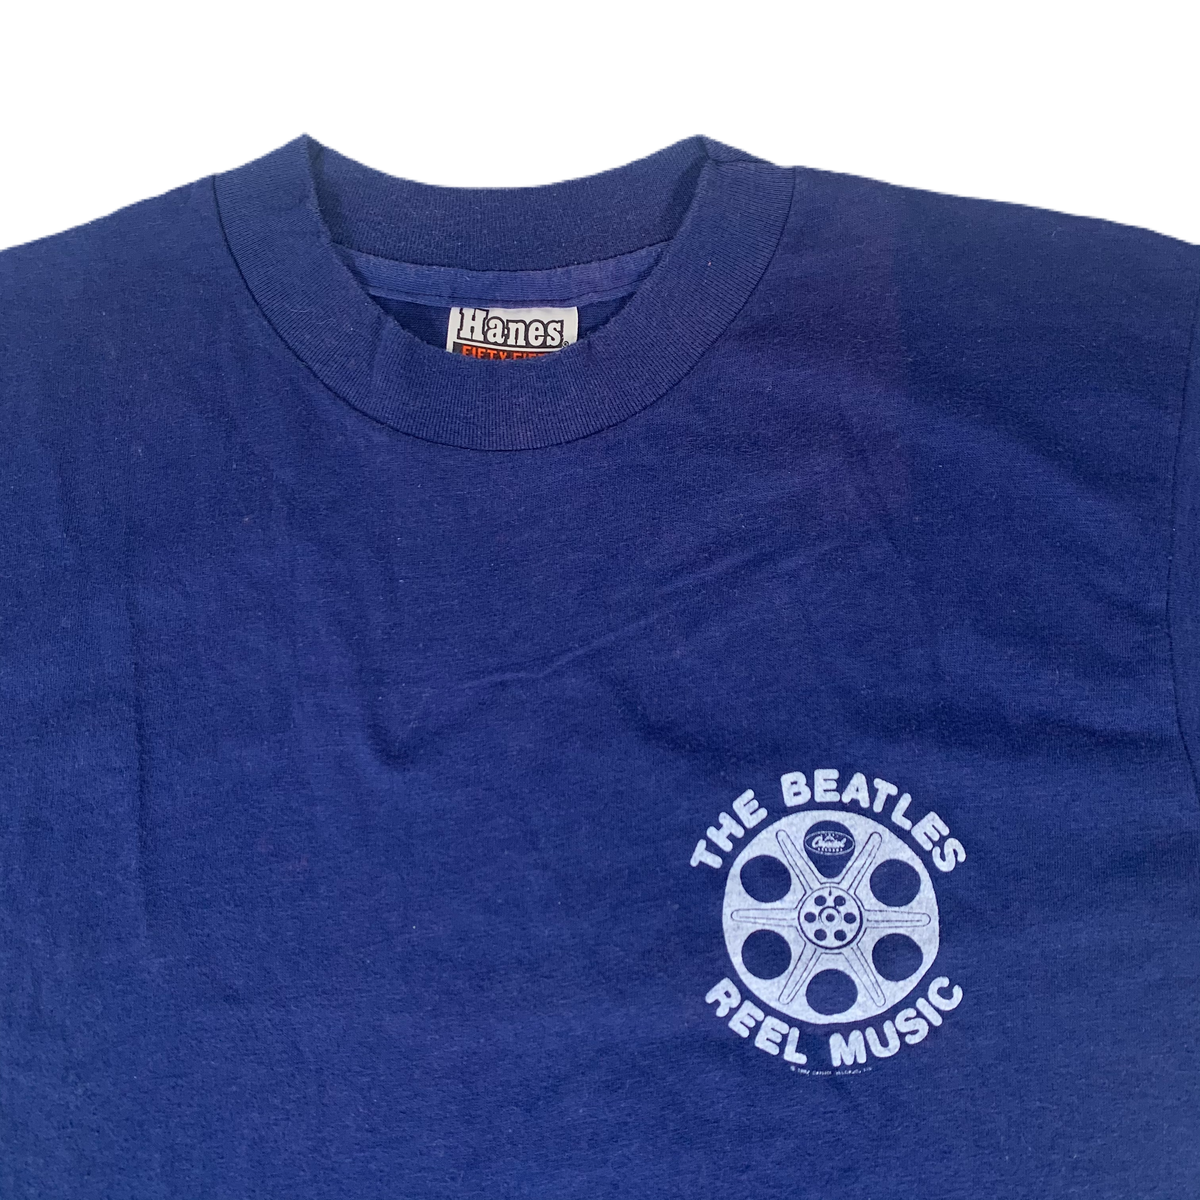 Vintage The Beatles Reel Music Capitol Records T-Shirt